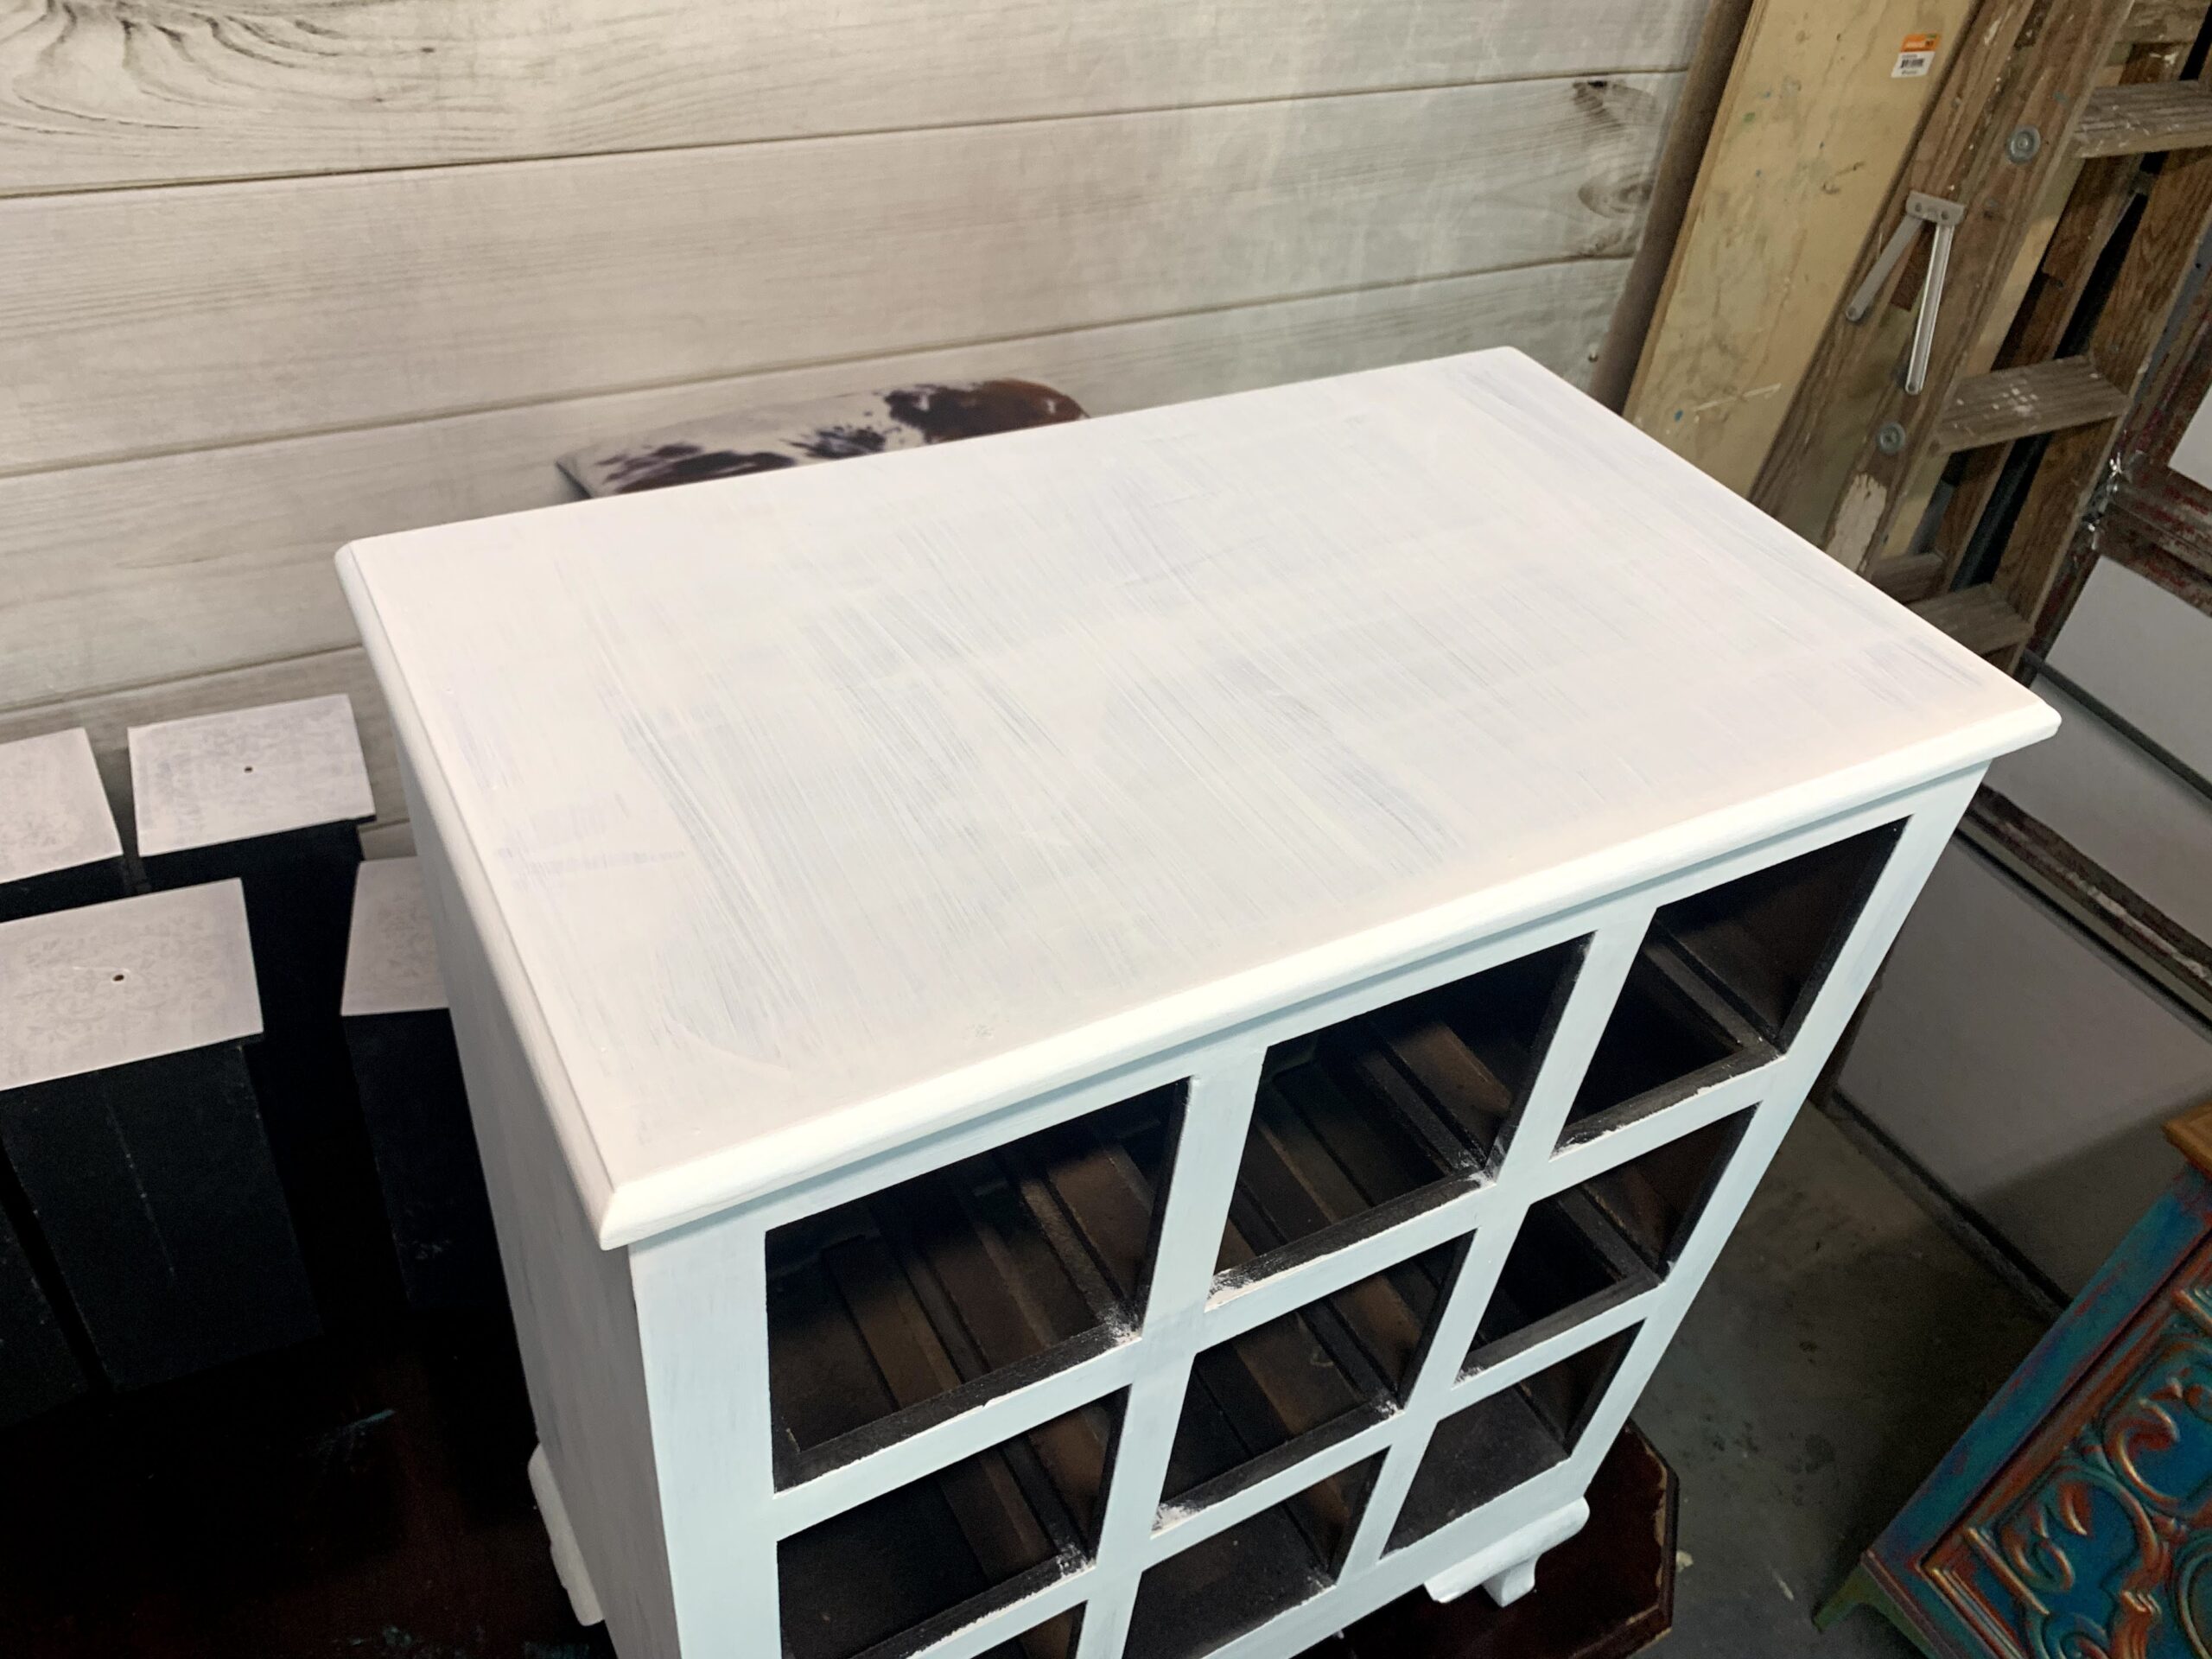 How to Paint a Cabinet